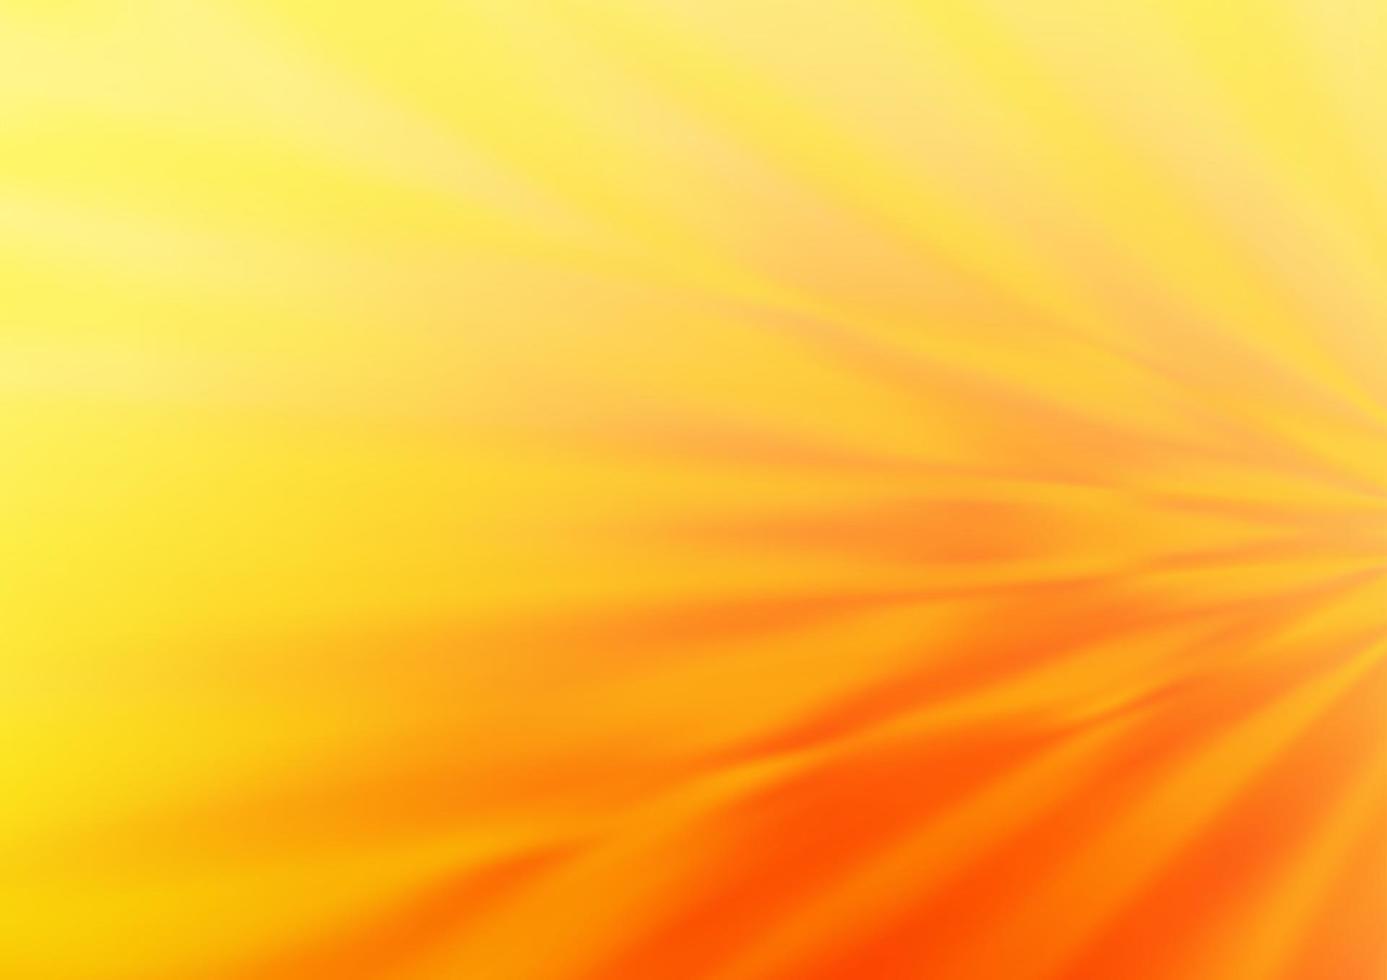 Light Yellow, Orange vector abstract bright template.